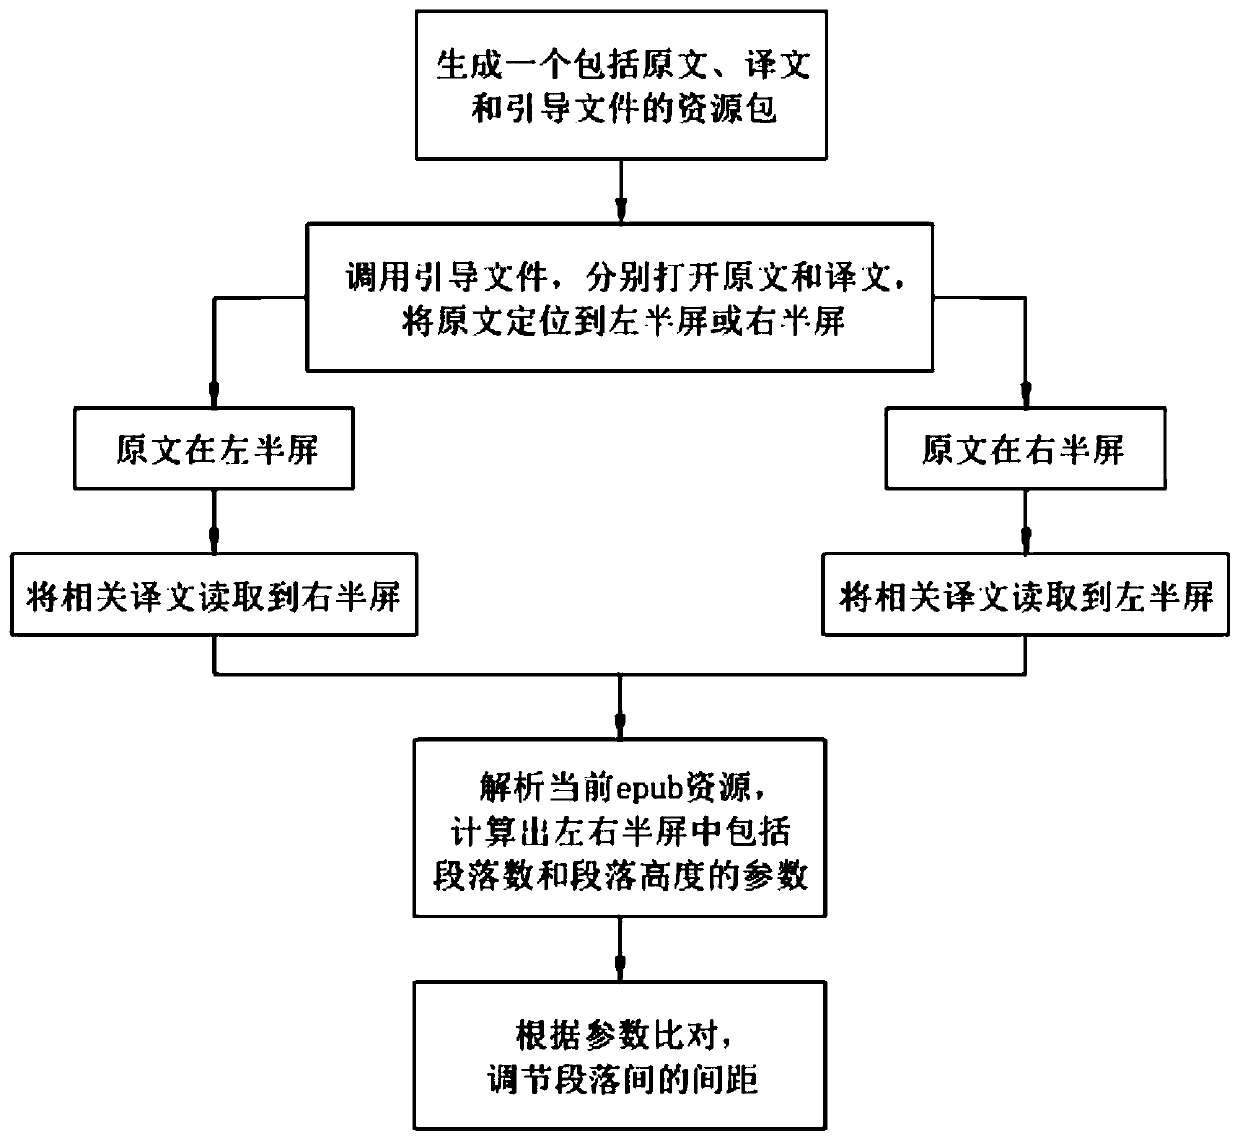 An iPad-based Epub book double-language contrast reading method and system